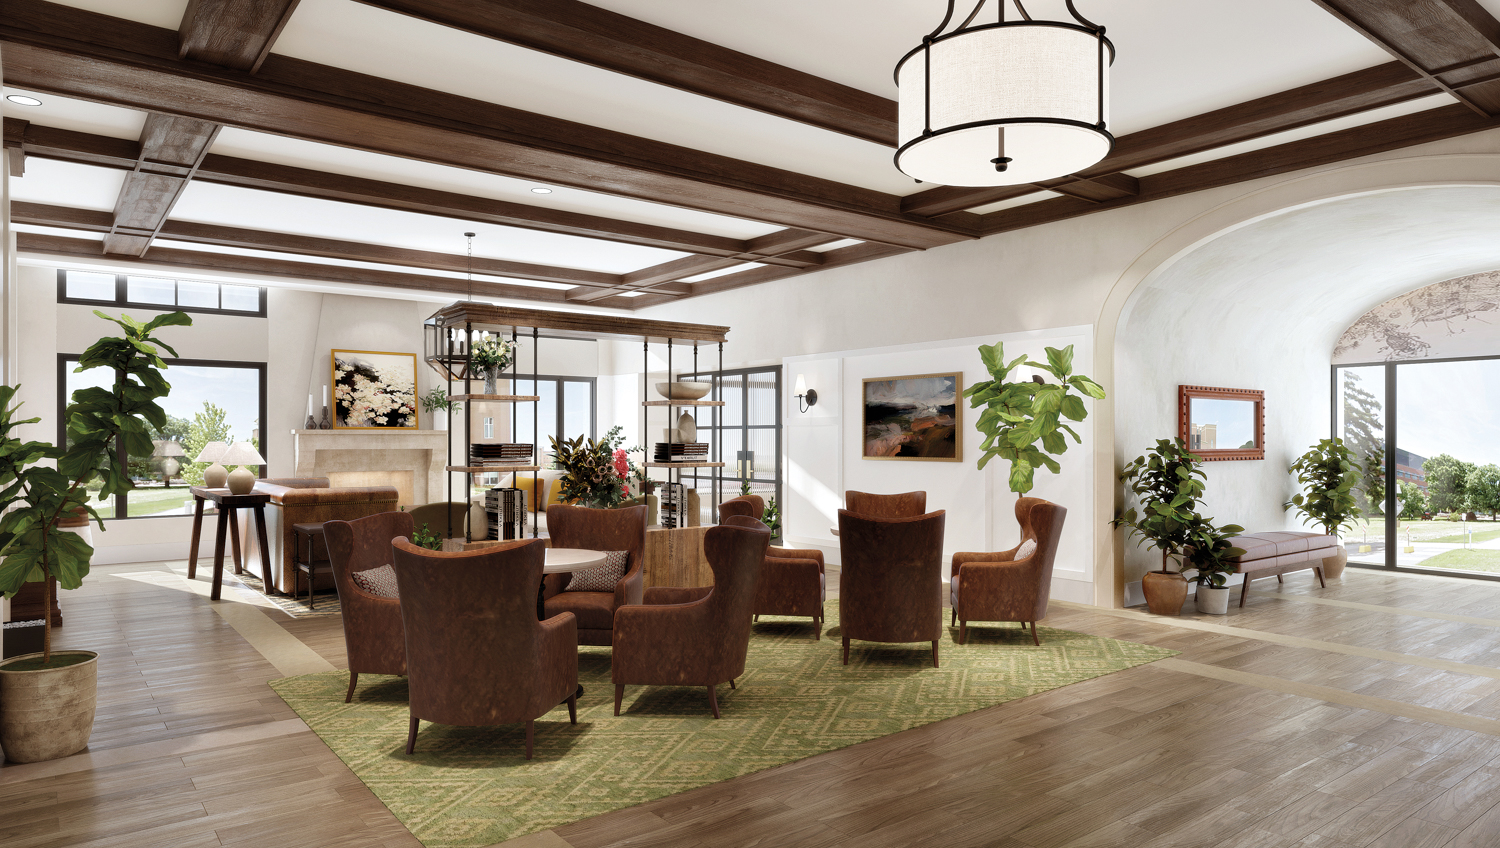 The Benson Hotel lounge room with dark-brown armchairs, wood beams on a white ceiling, and a green area rug